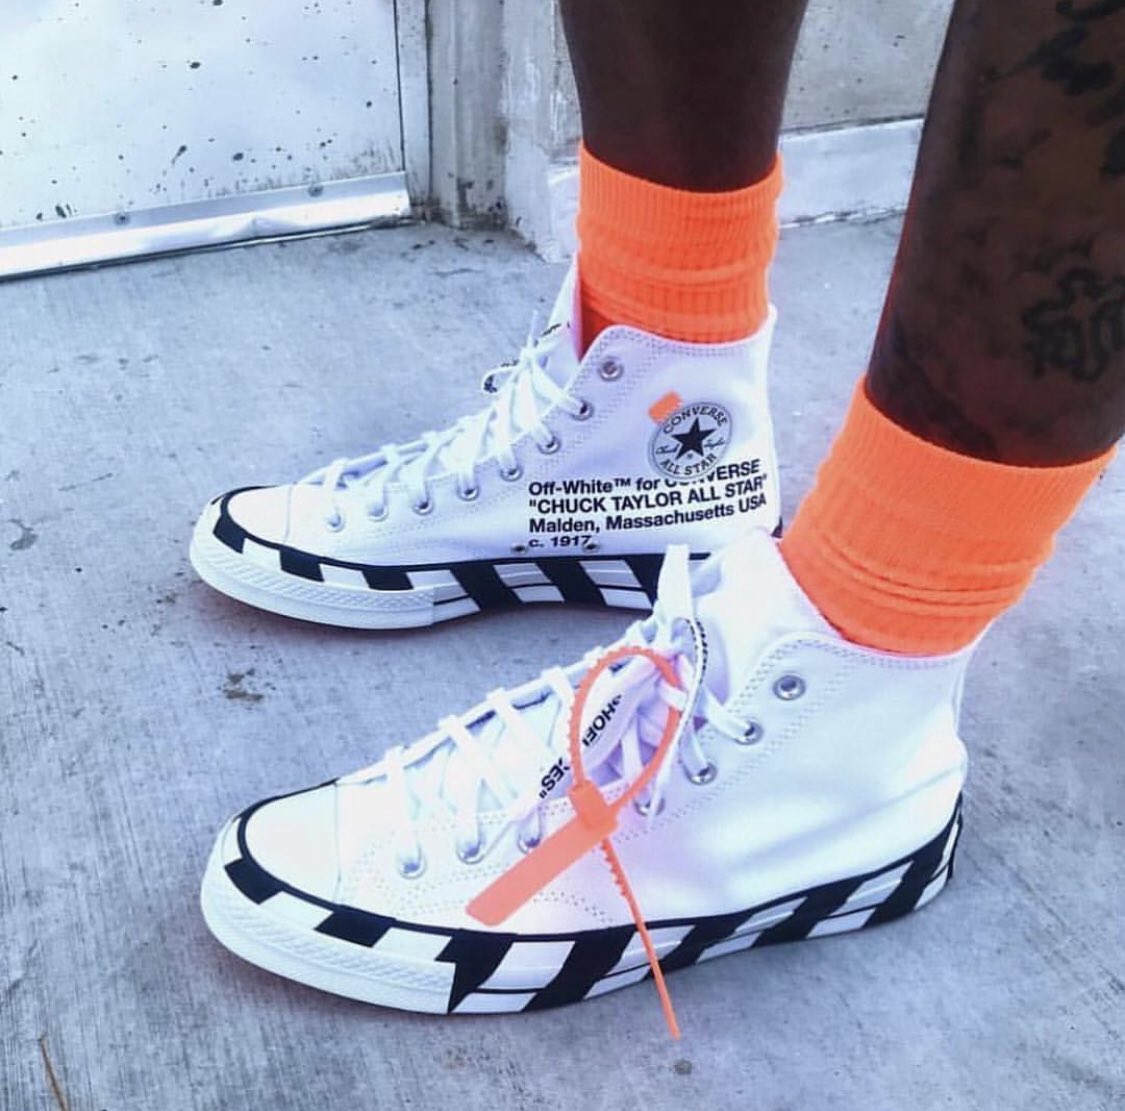 SNKR_TWITR on X: "On look at the Off-White x Converse "70s" 📷 via @OffWht #snkr_twitr https://t.co/xe4fkeGsVl" / X